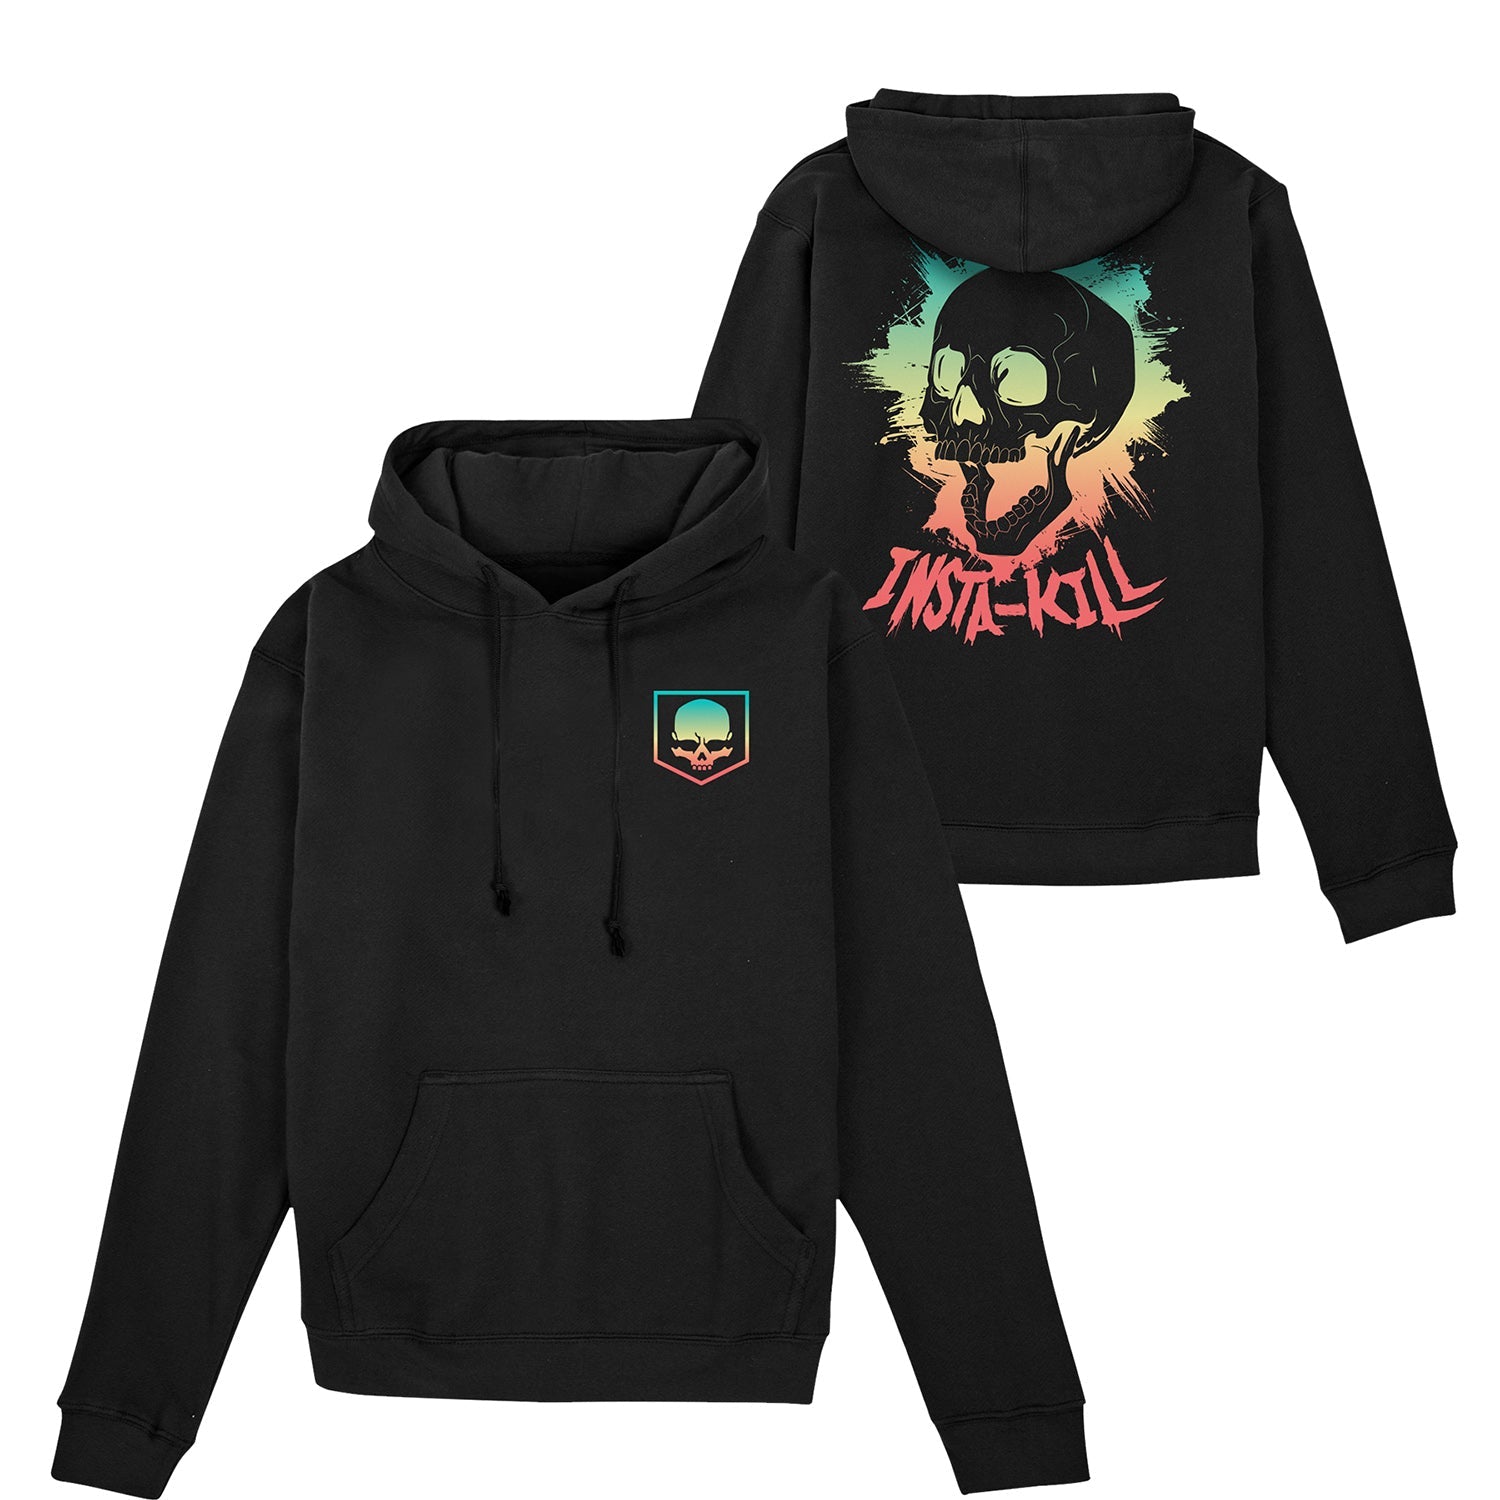 Call of Duty Black Insta-Kill Hoodie - Front and Back View